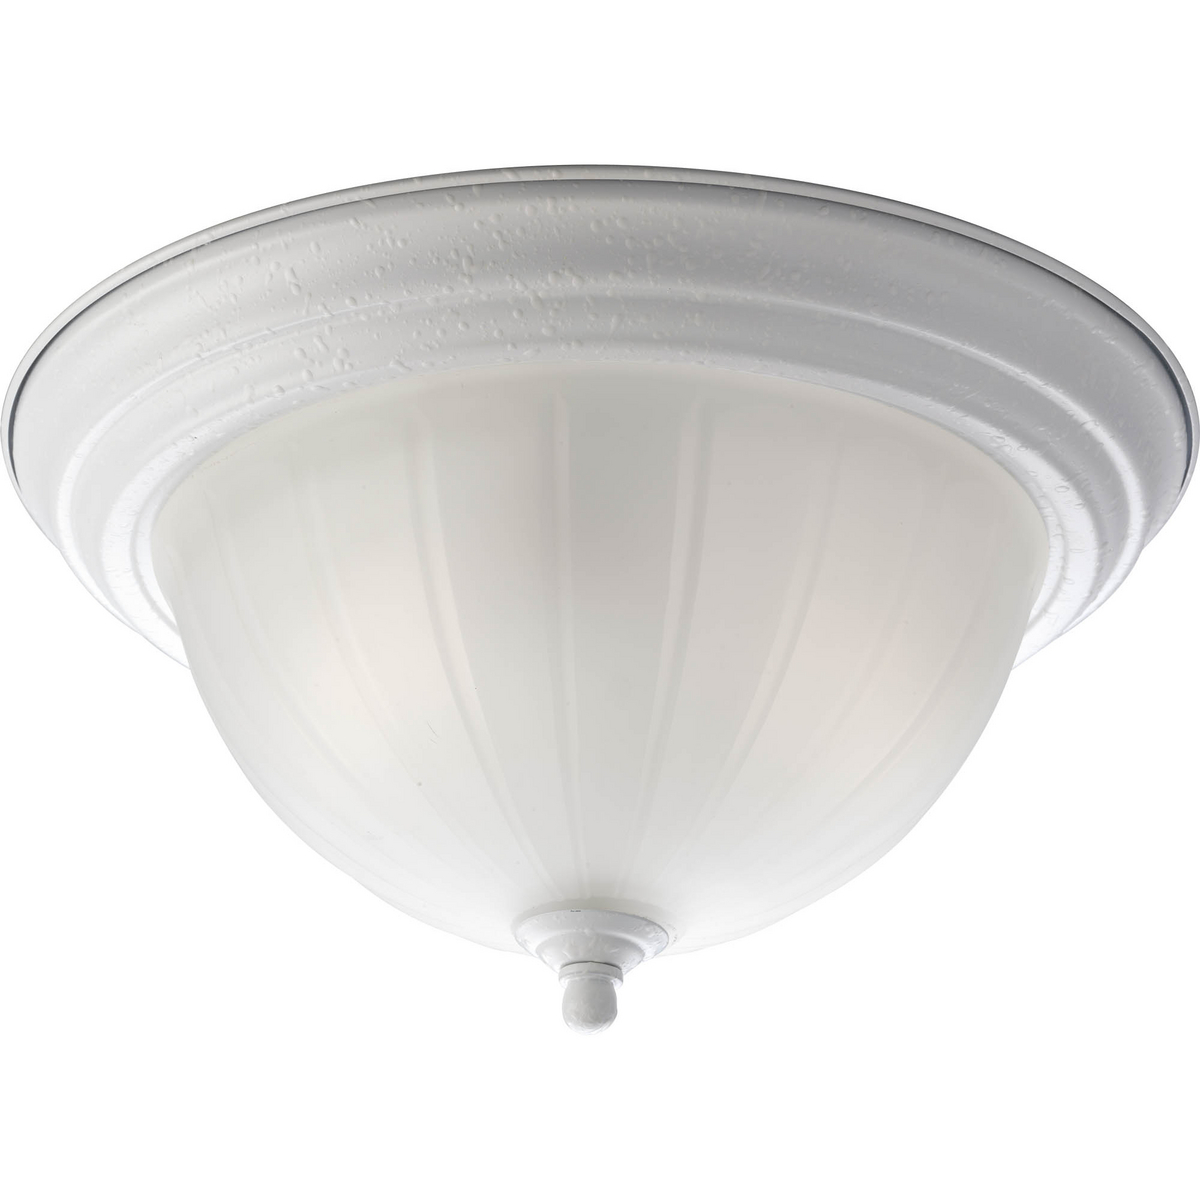 Two-light close-to-ceiling with etched ribbed melon glass with center lock up in White finish.